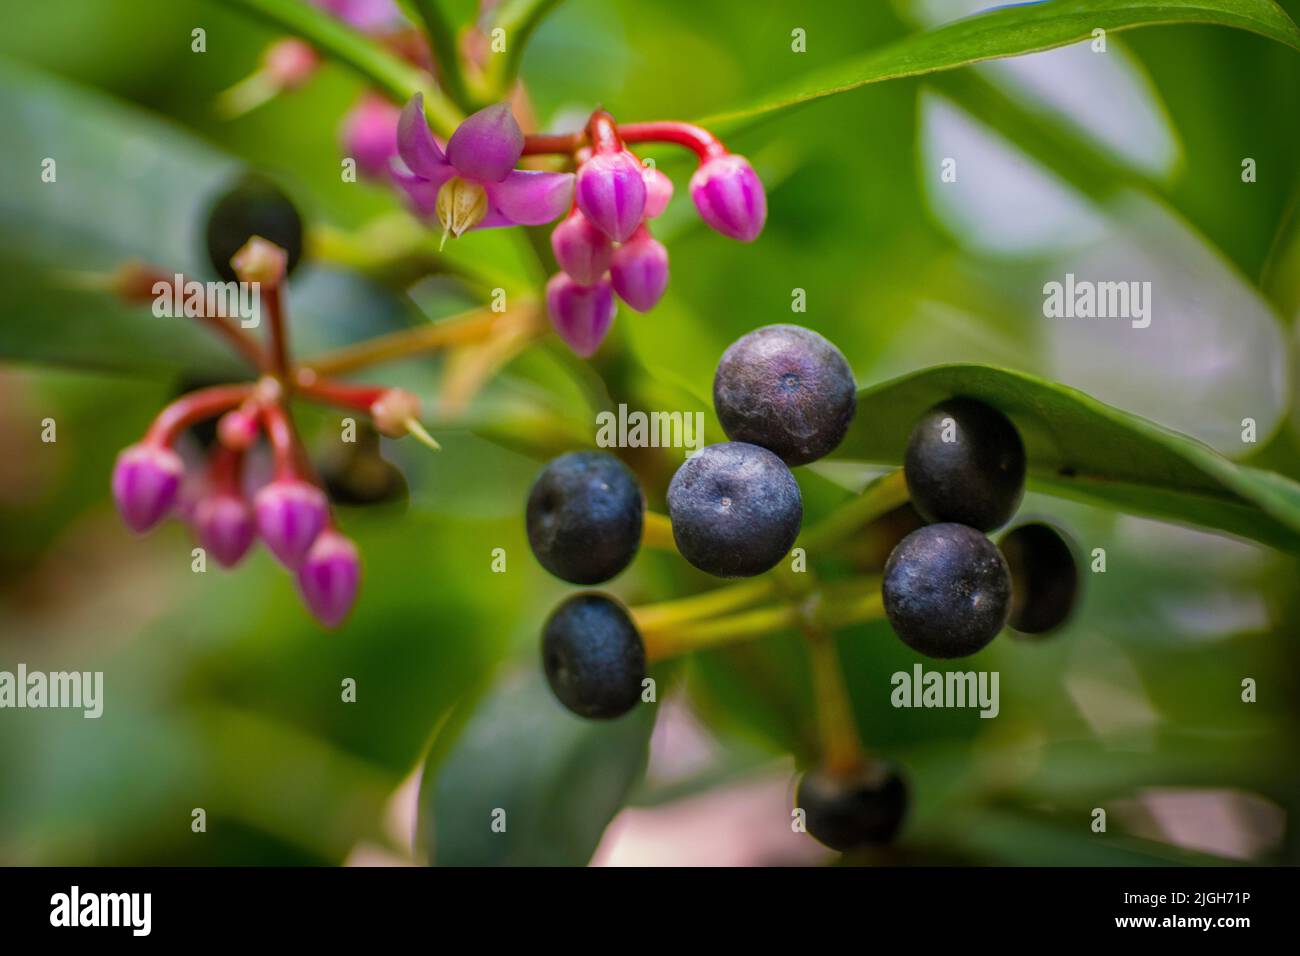 Closeup macro shot with selective focus of ardisia lurida showing berries and flowers Stock Photo